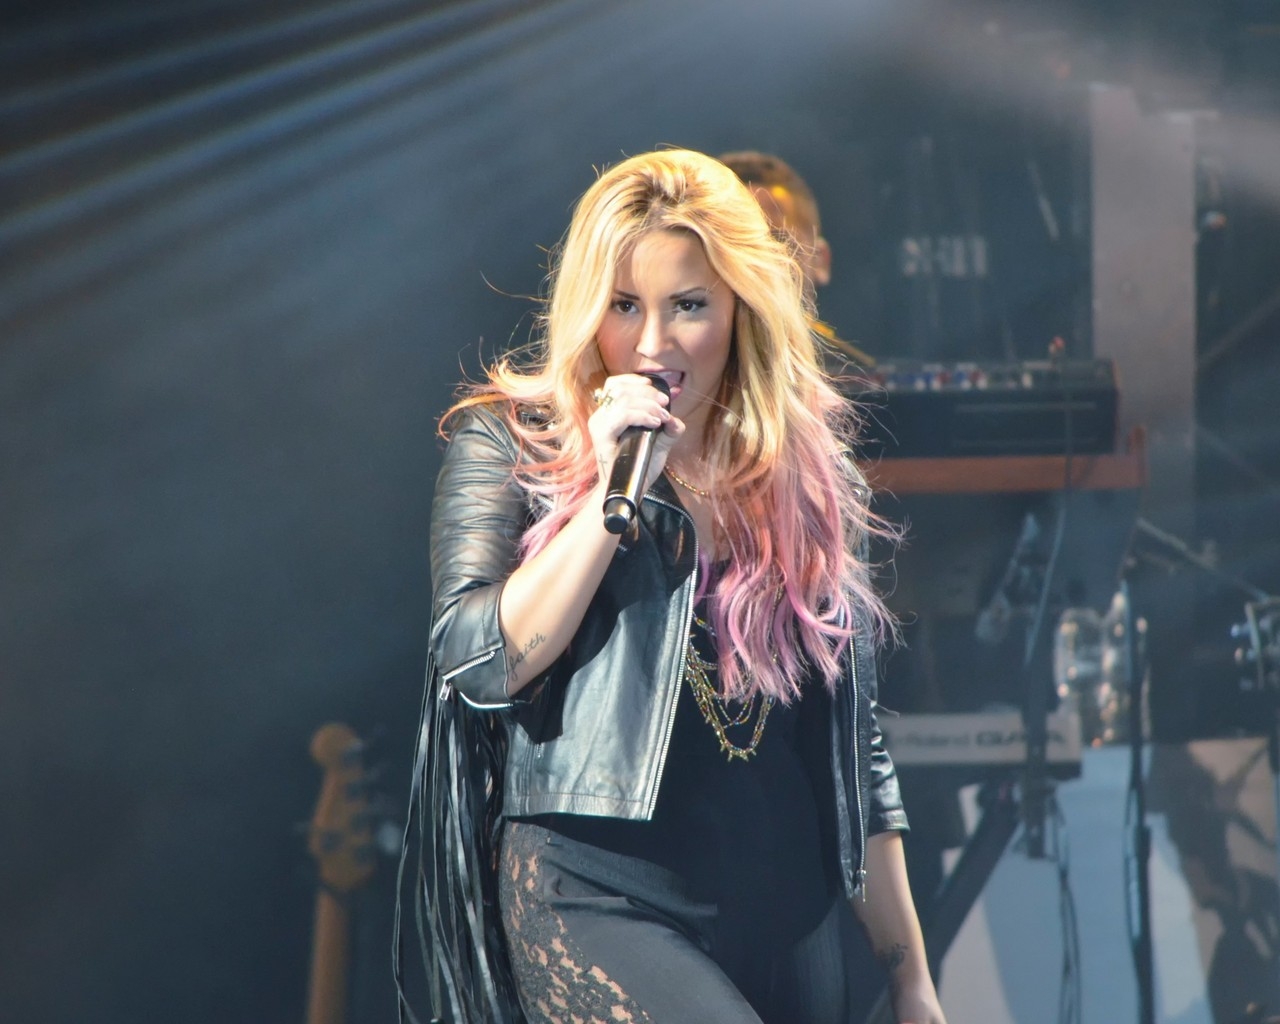 Demi Lovato Performing  for 1280 x 1024 resolution